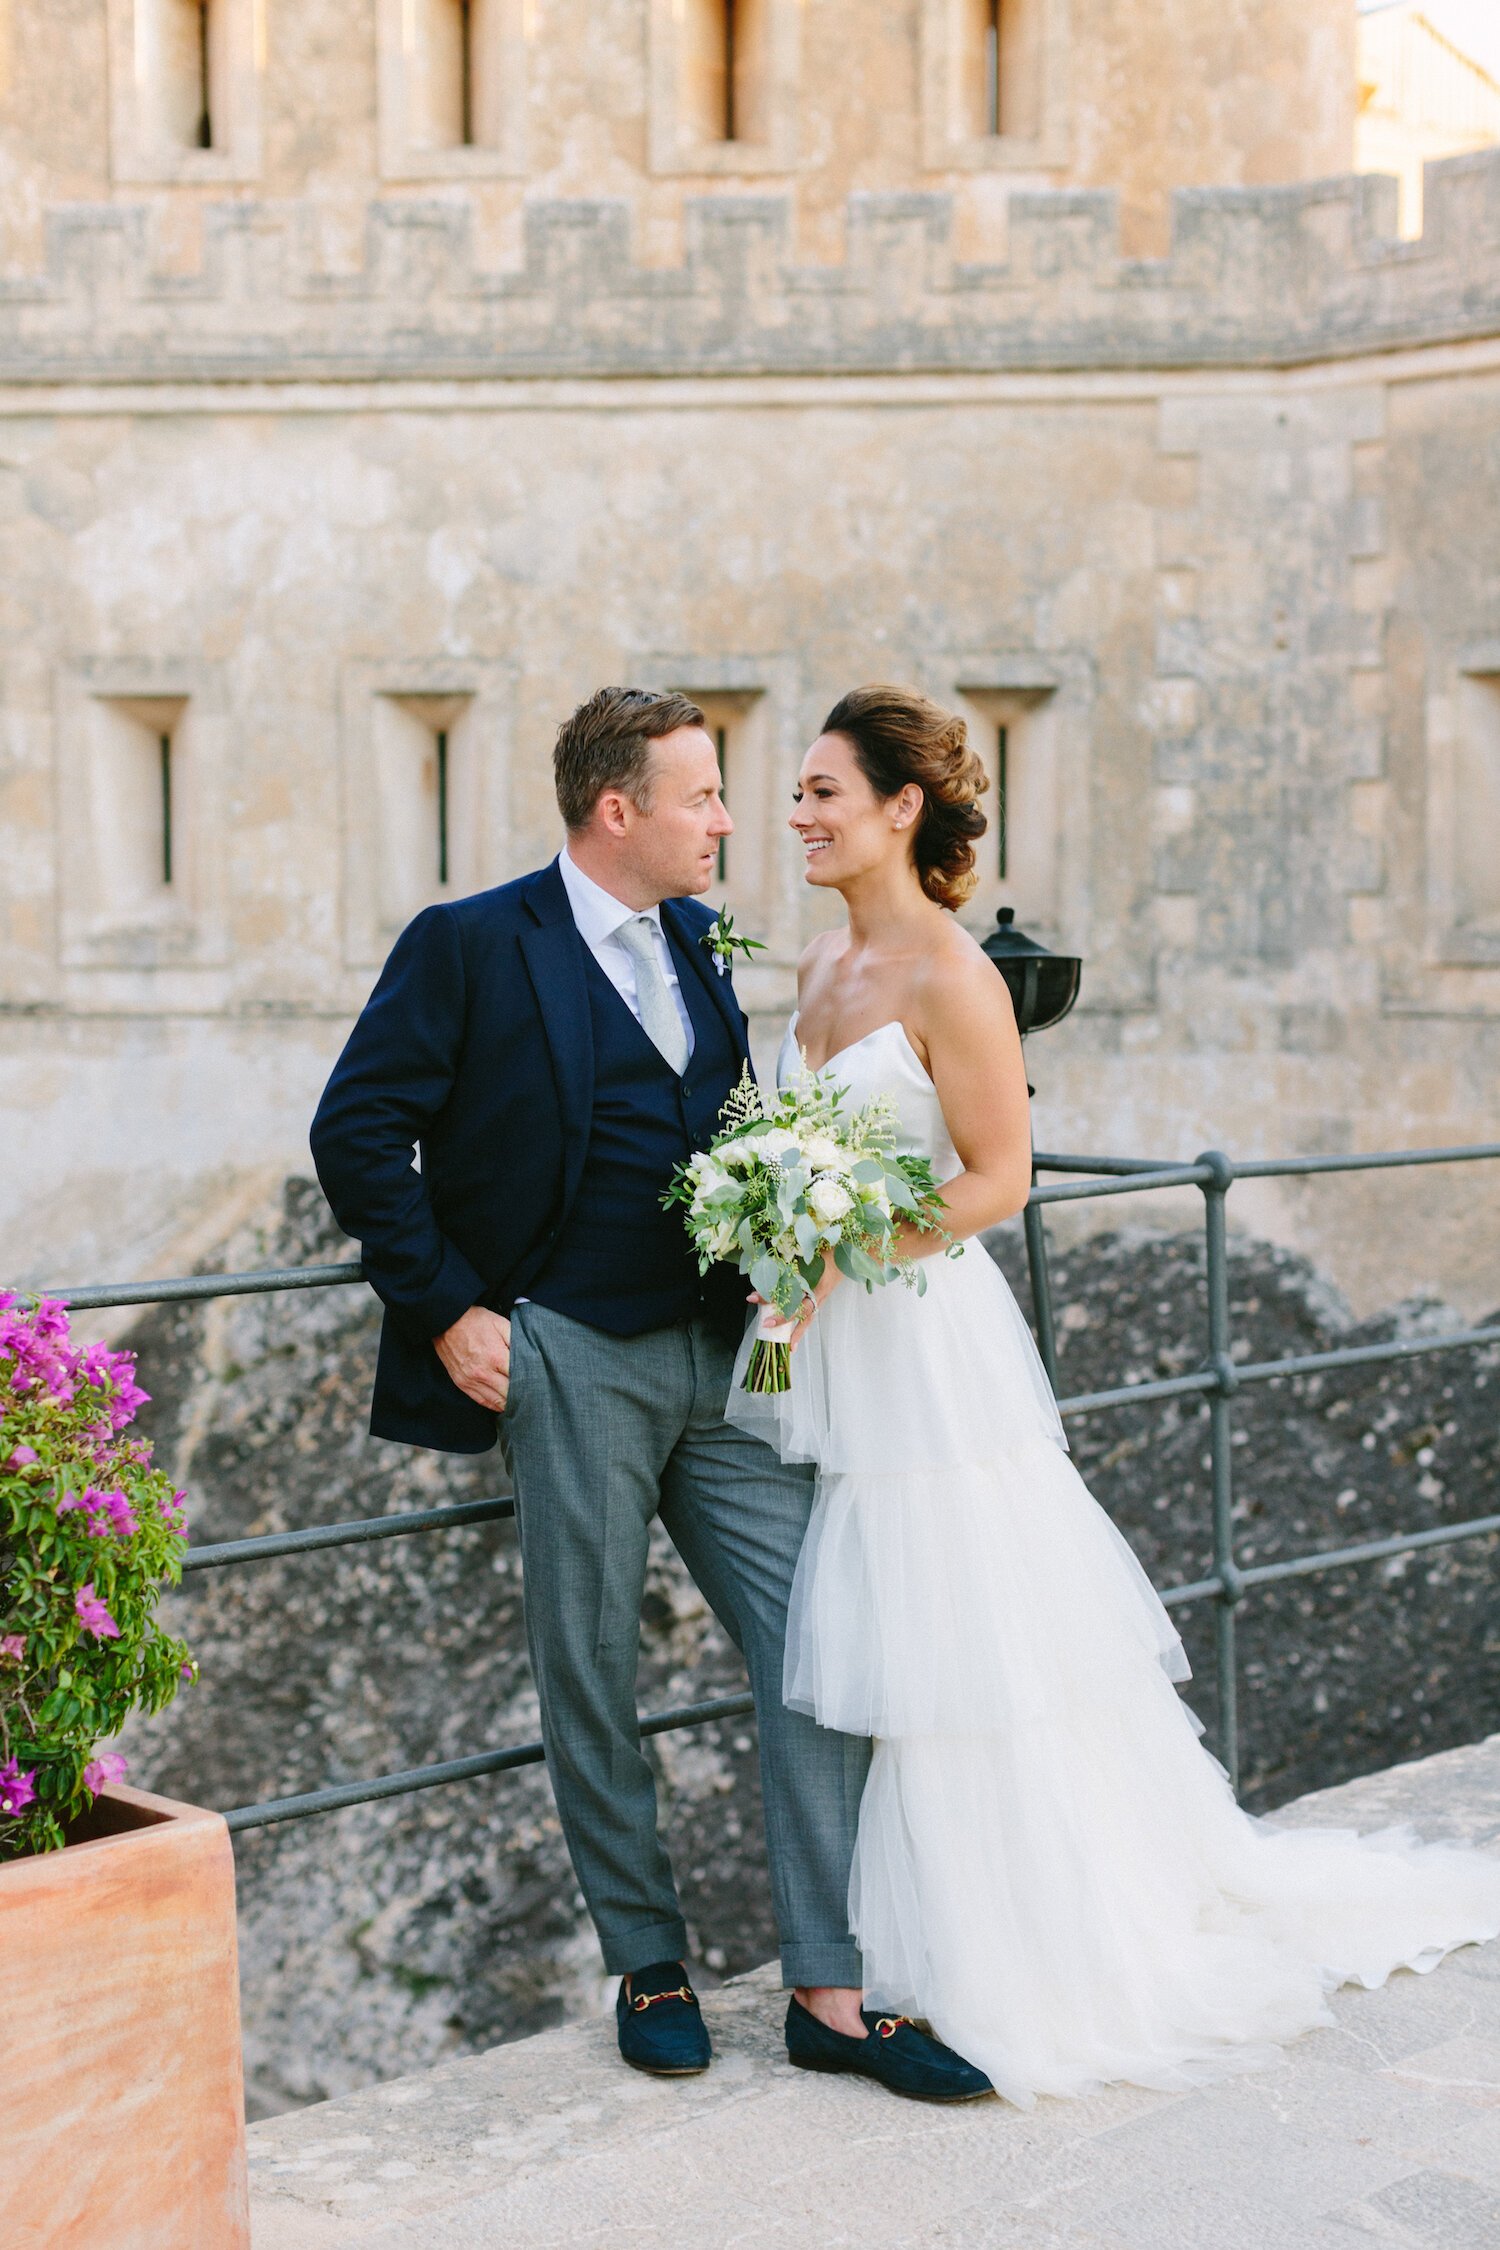 Beautiful bride Denise wore the Rita skirt and Ladbroke corset by Halfpenny London for her wedding day